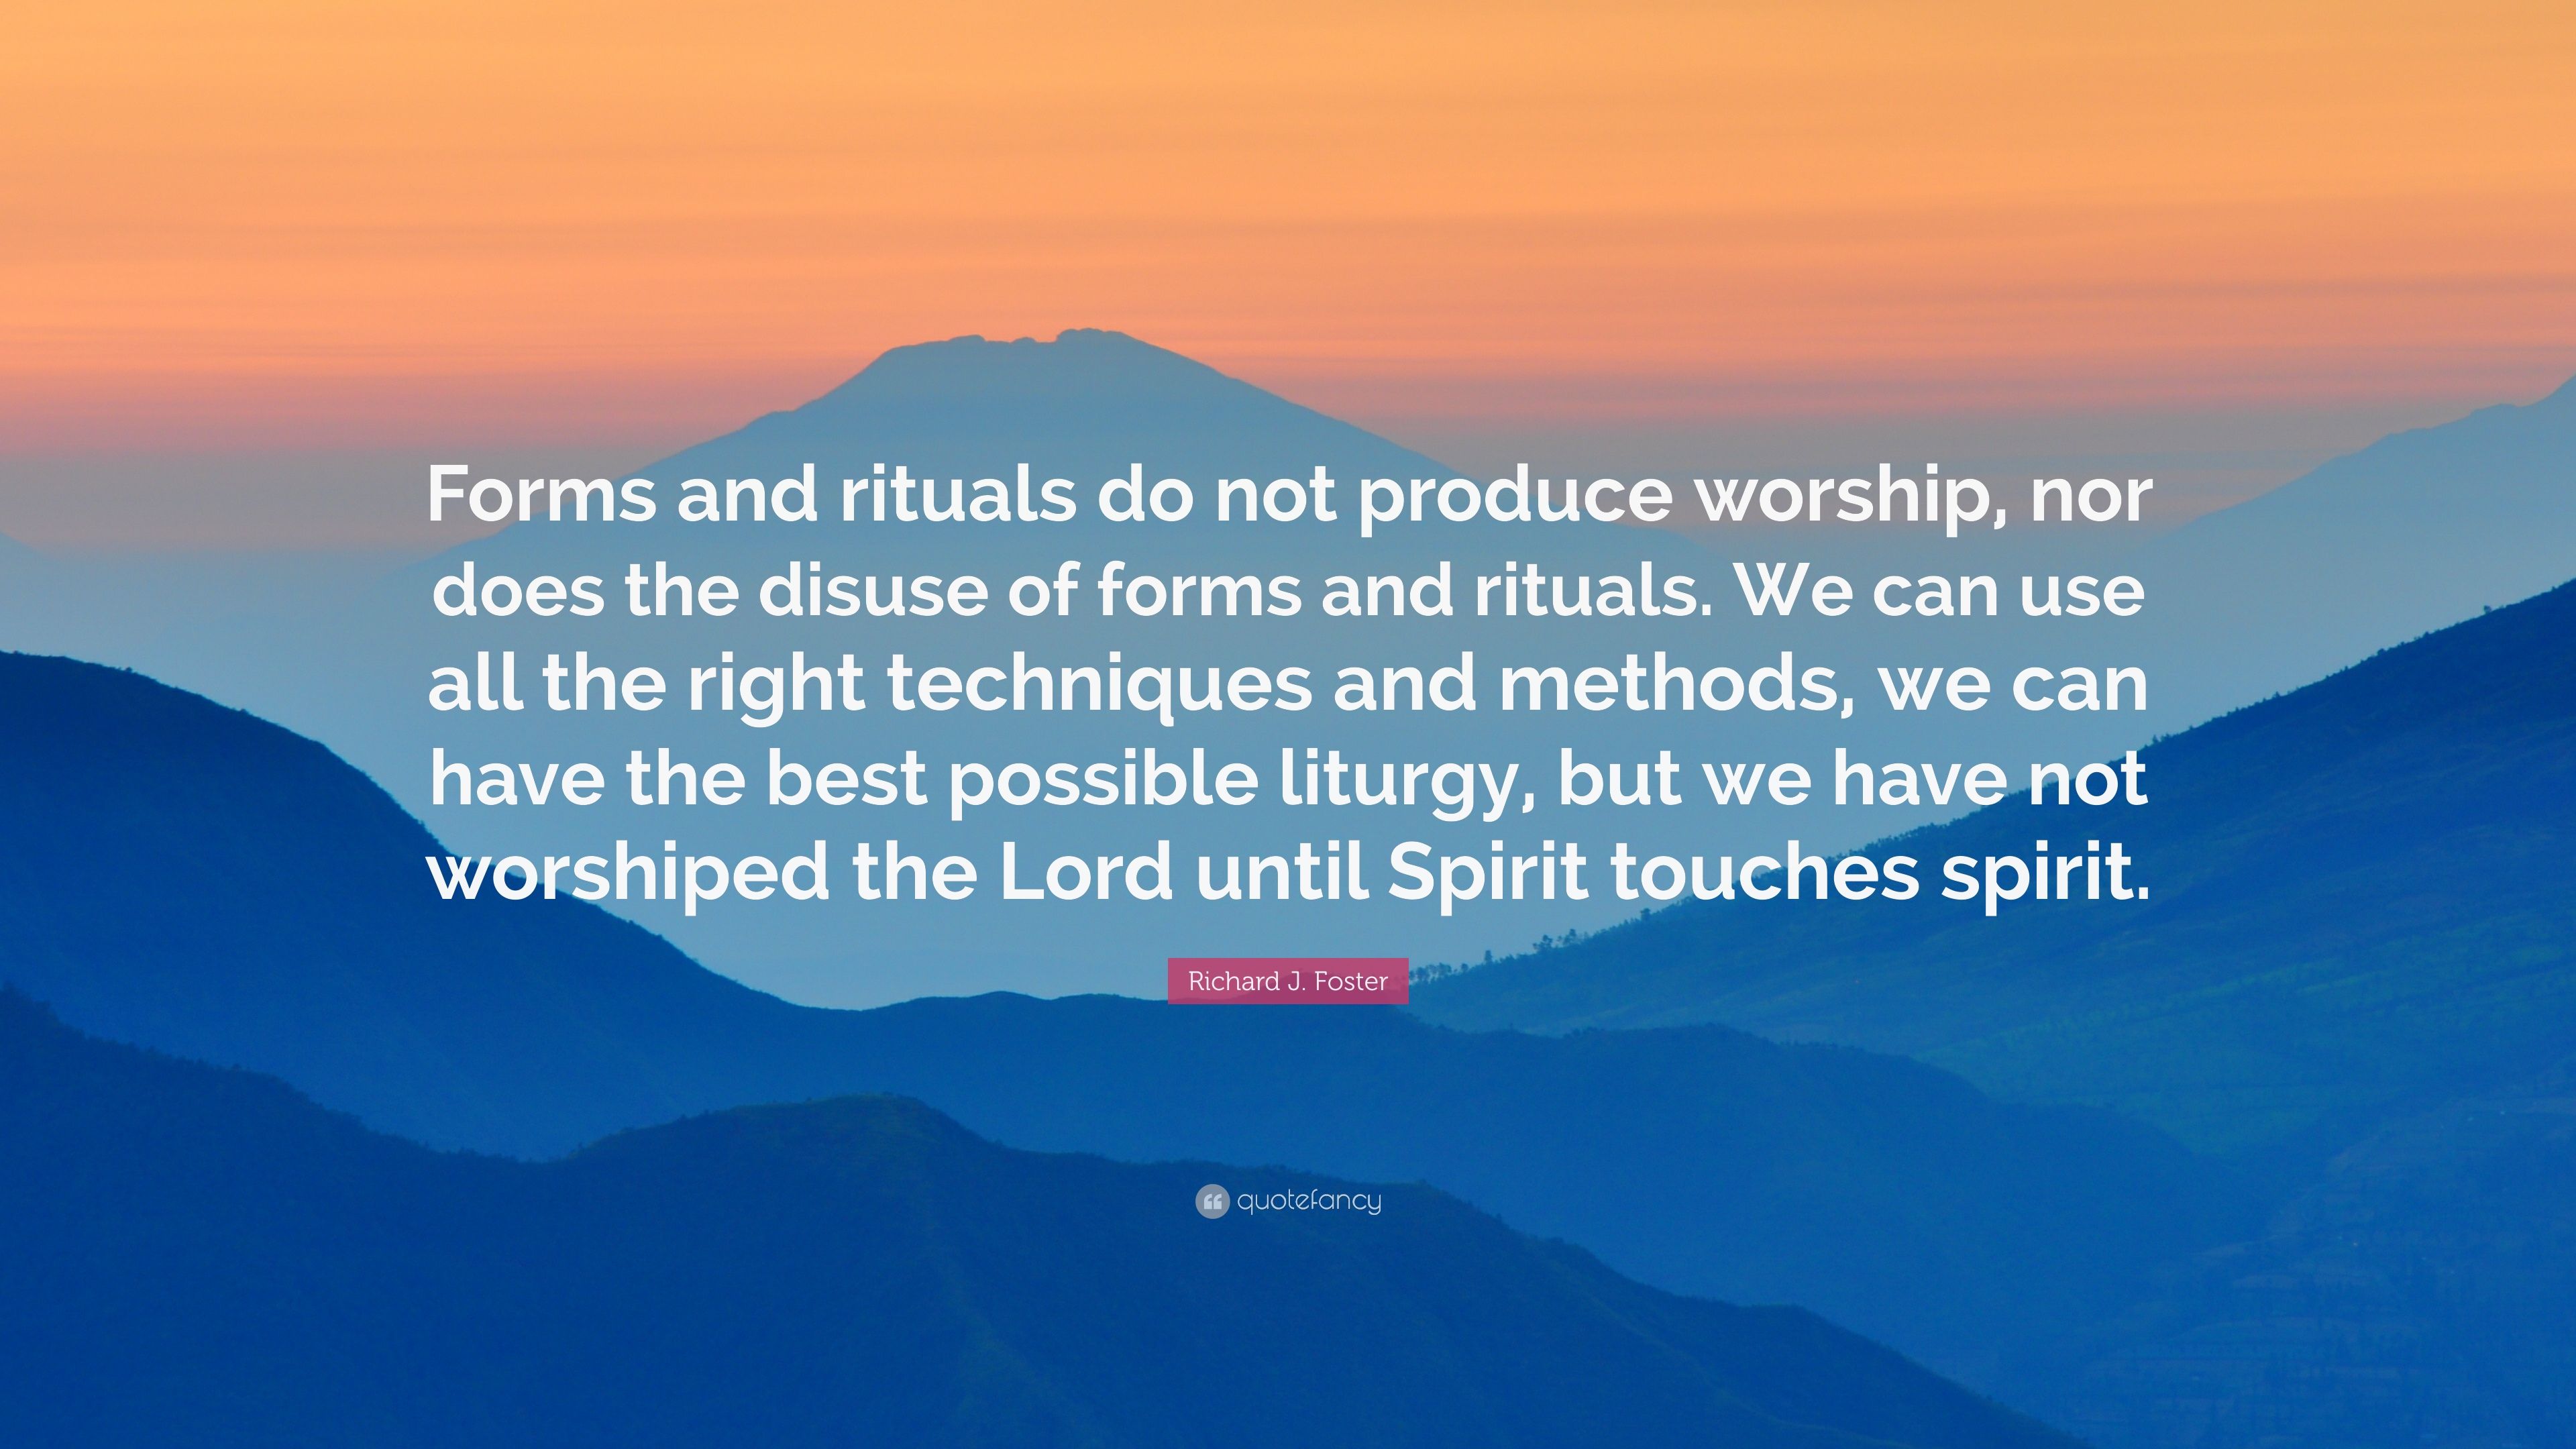 Richard J. Foster Quote: “Forms and rituals do not produce worship